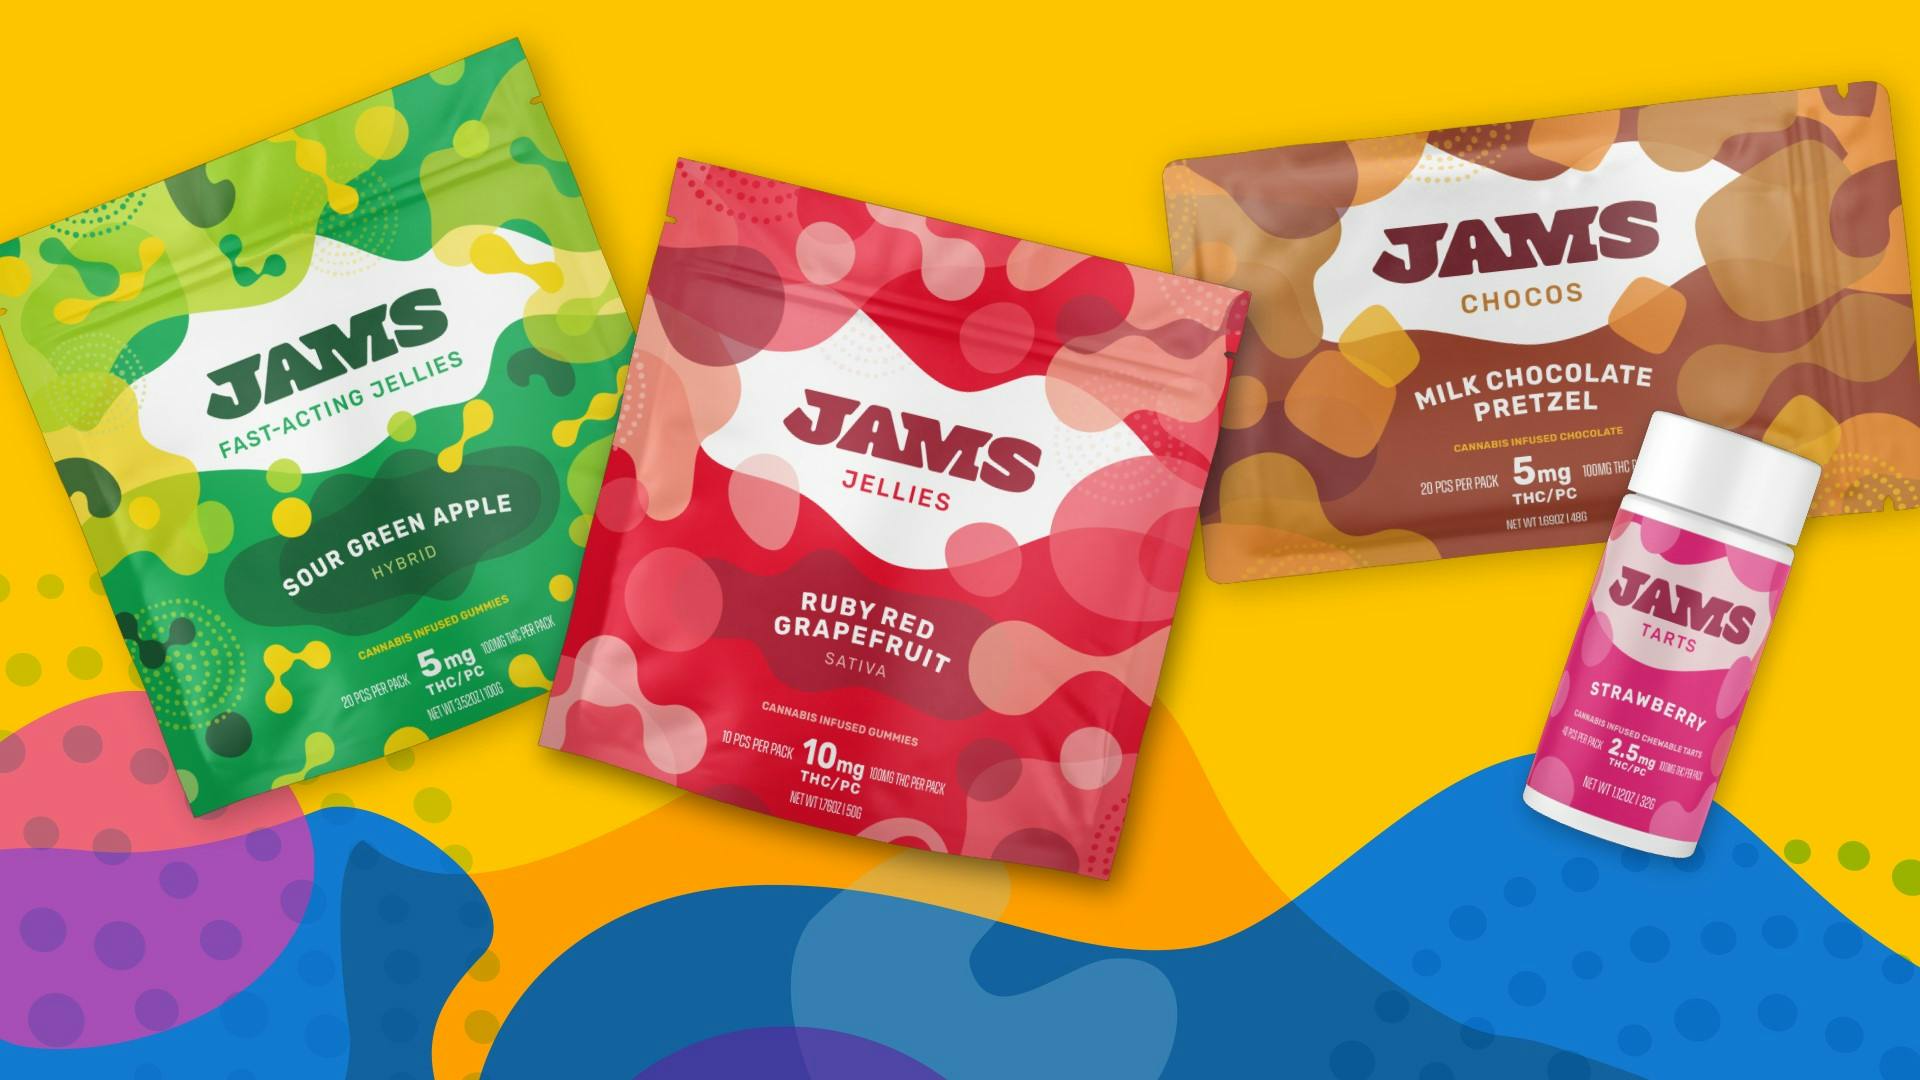 Curaleaf Launches New Cannabis Edibles Brand JAMS, 'Combining Great Flavor With Innovative Cannabinoid Delivery Technologies'